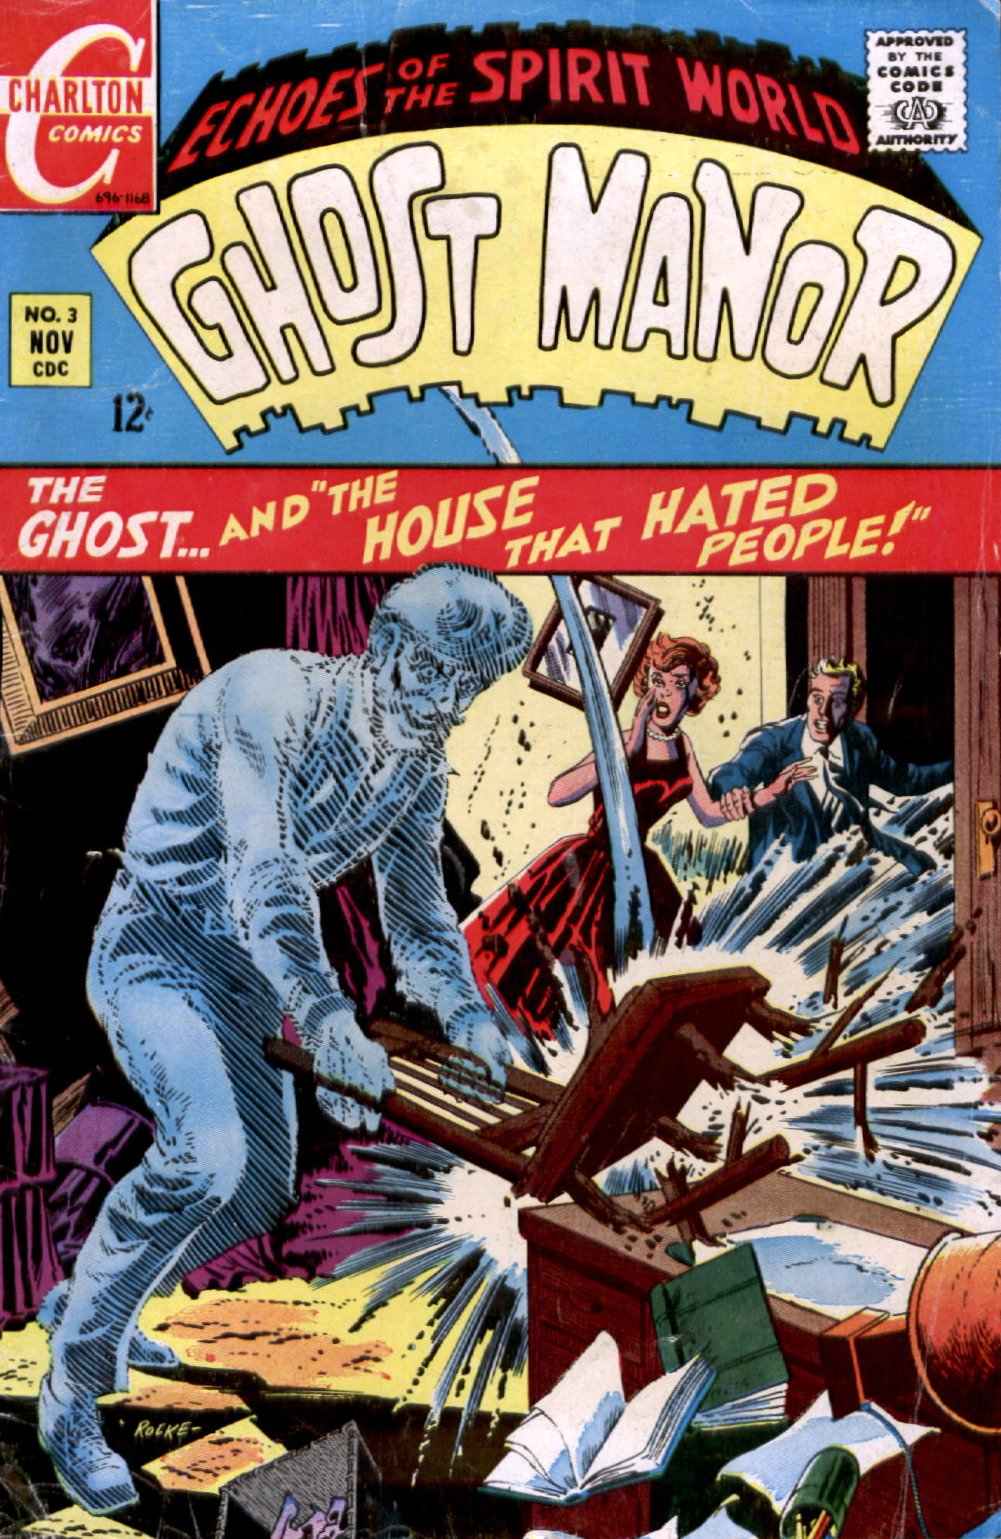 Read online Ghost Manor comic -  Issue #3 - 1